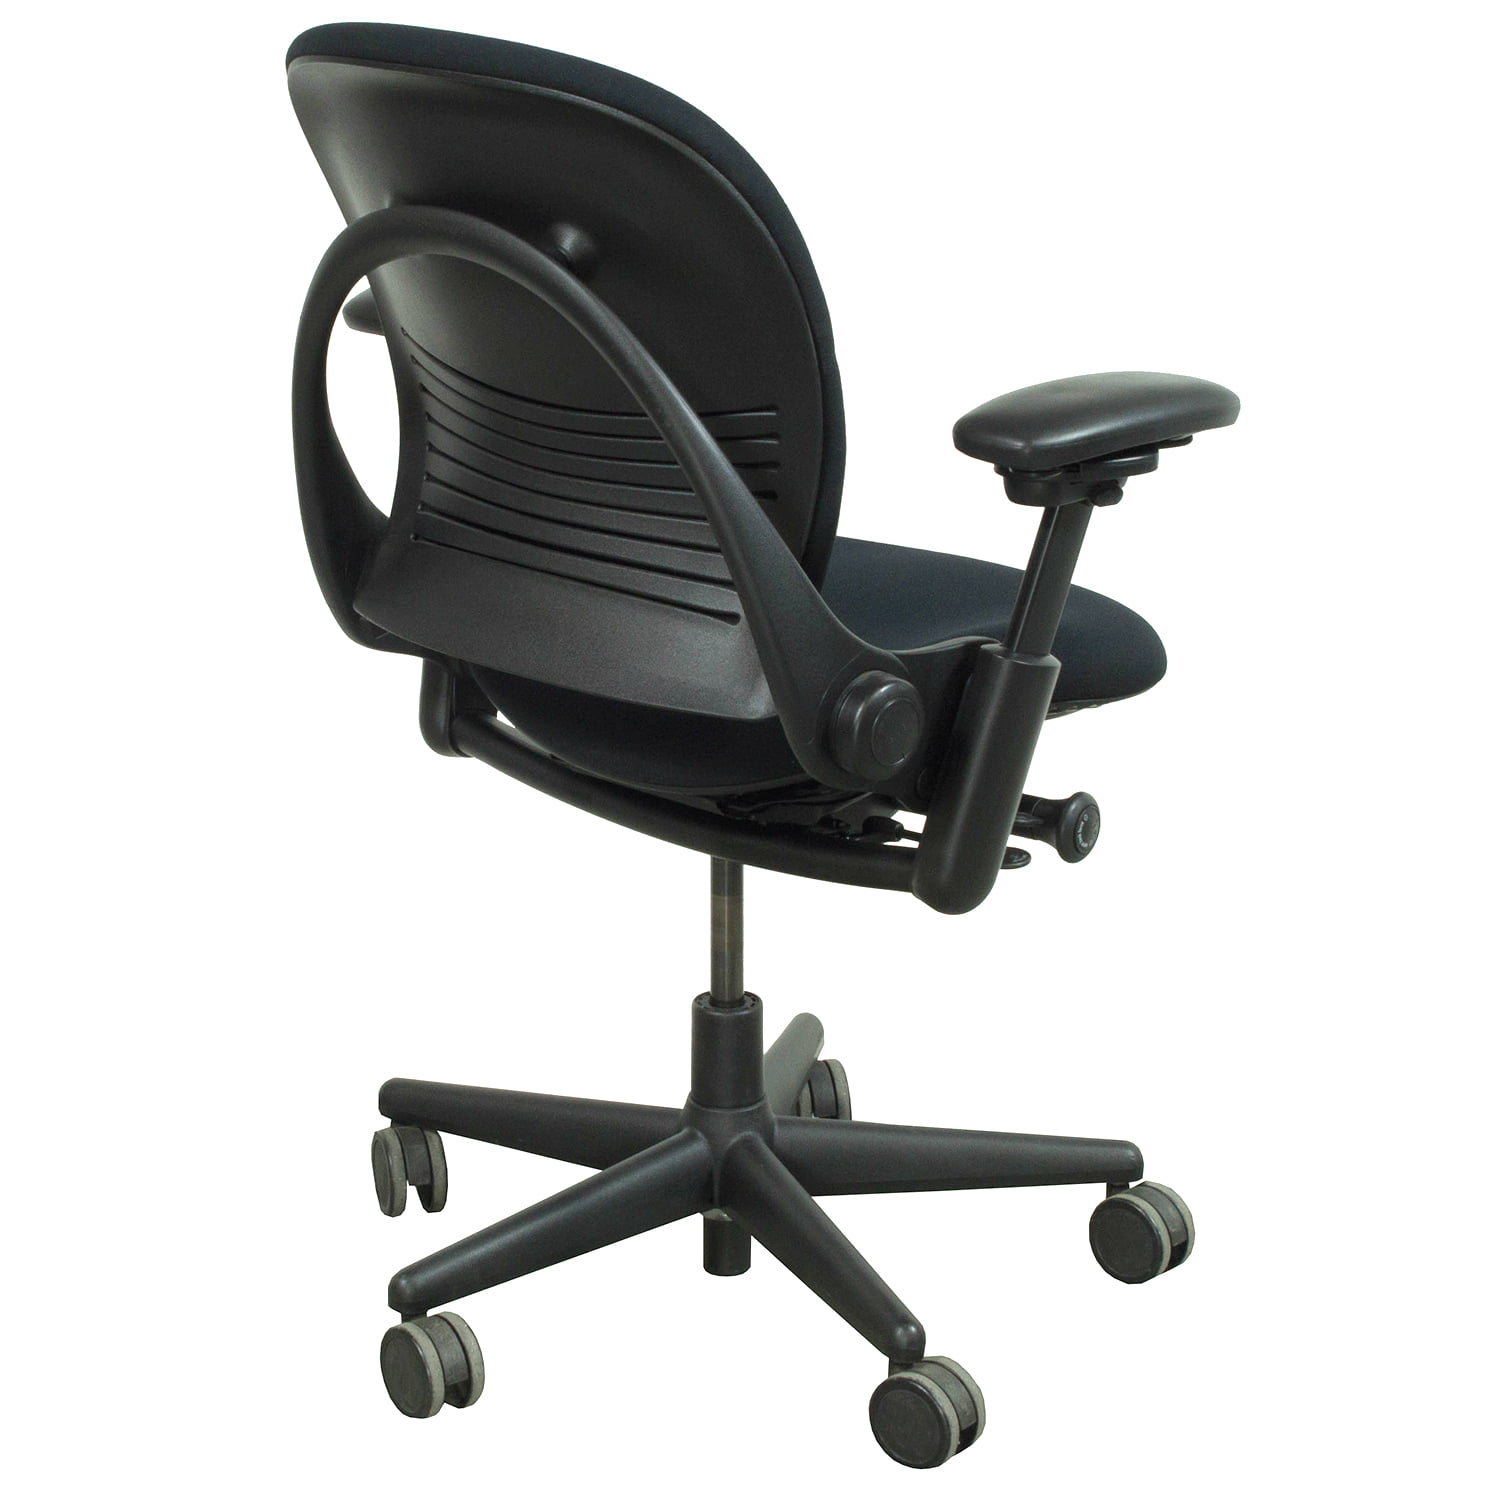 Steelcase Leap 1 Office Chair Unisource Office Furniture Parts Inc